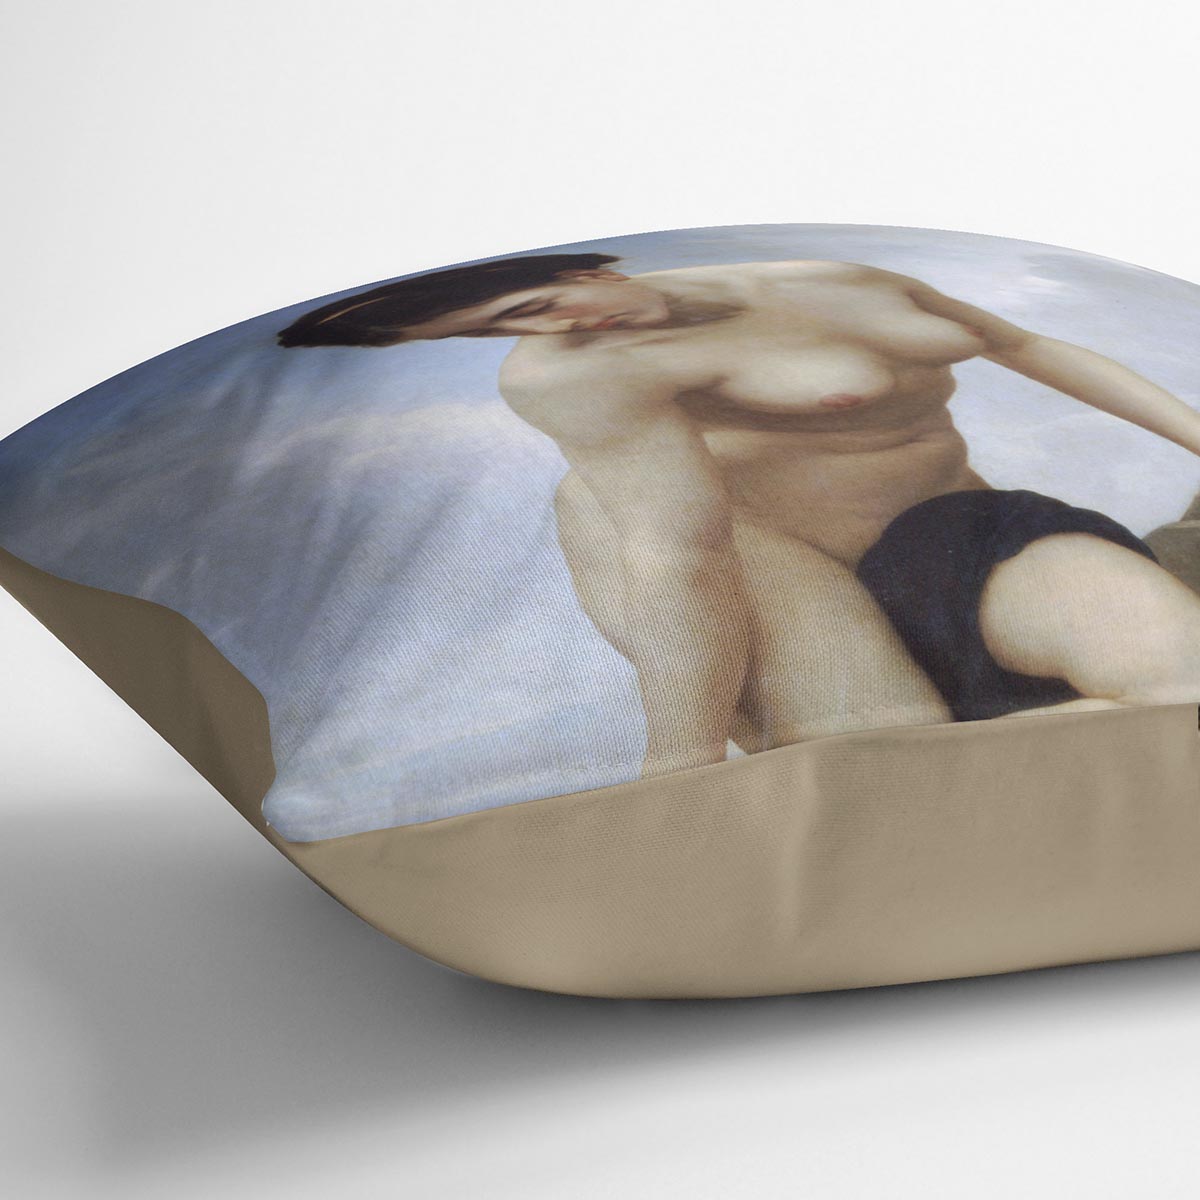 After the Bath By Bouguereau Cushion